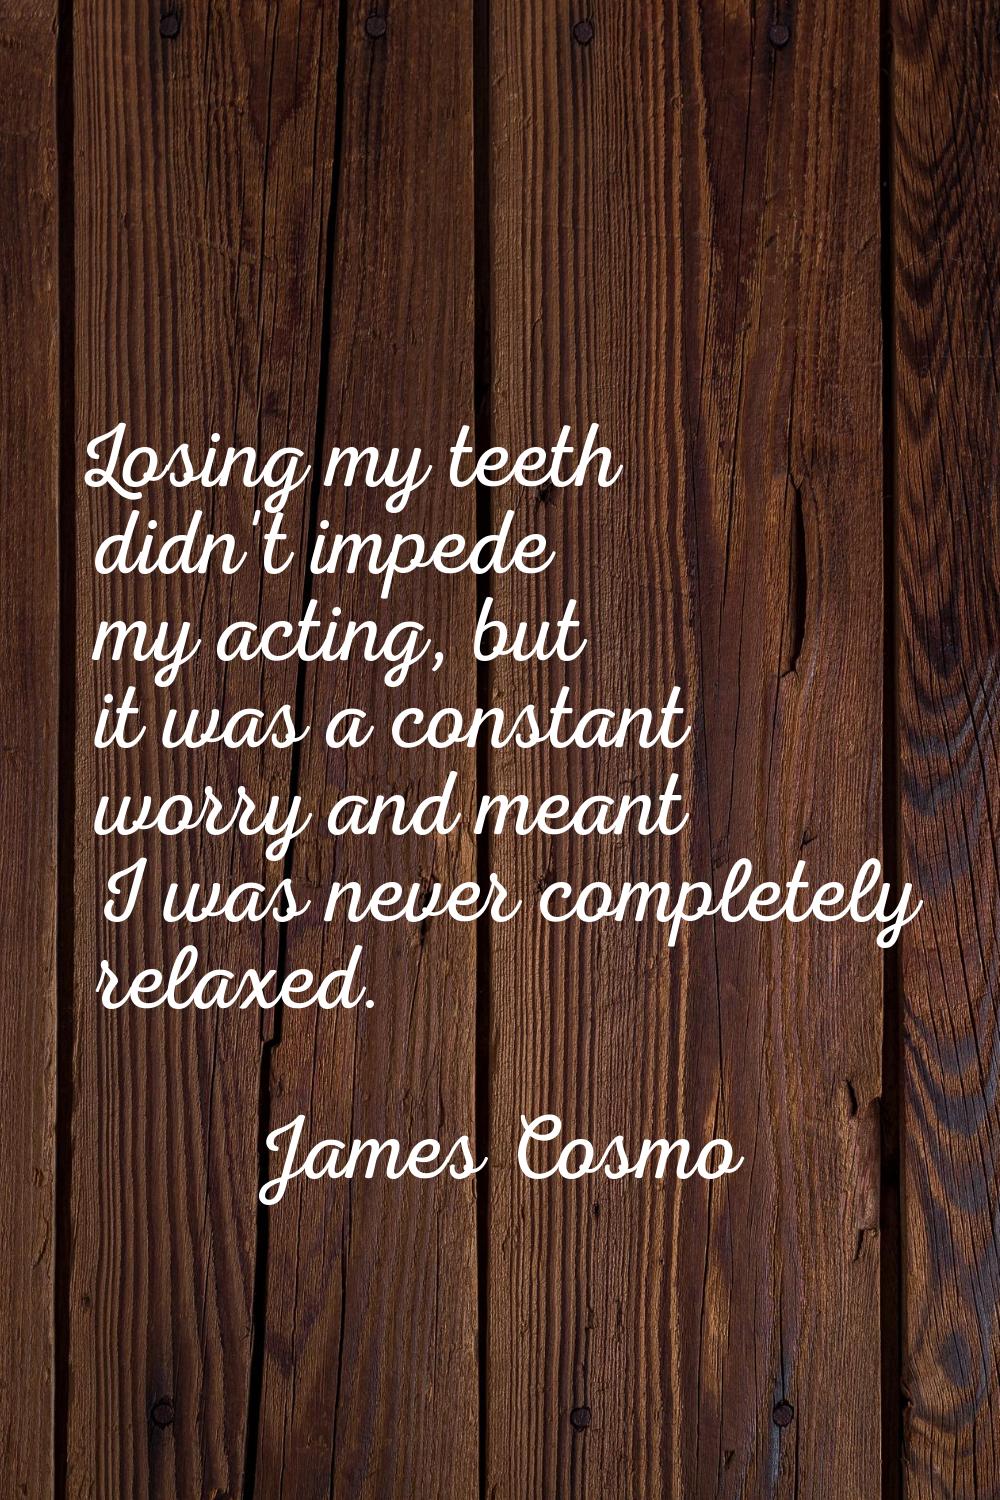 Losing my teeth didn't impede my acting, but it was a constant worry and meant I was never complete